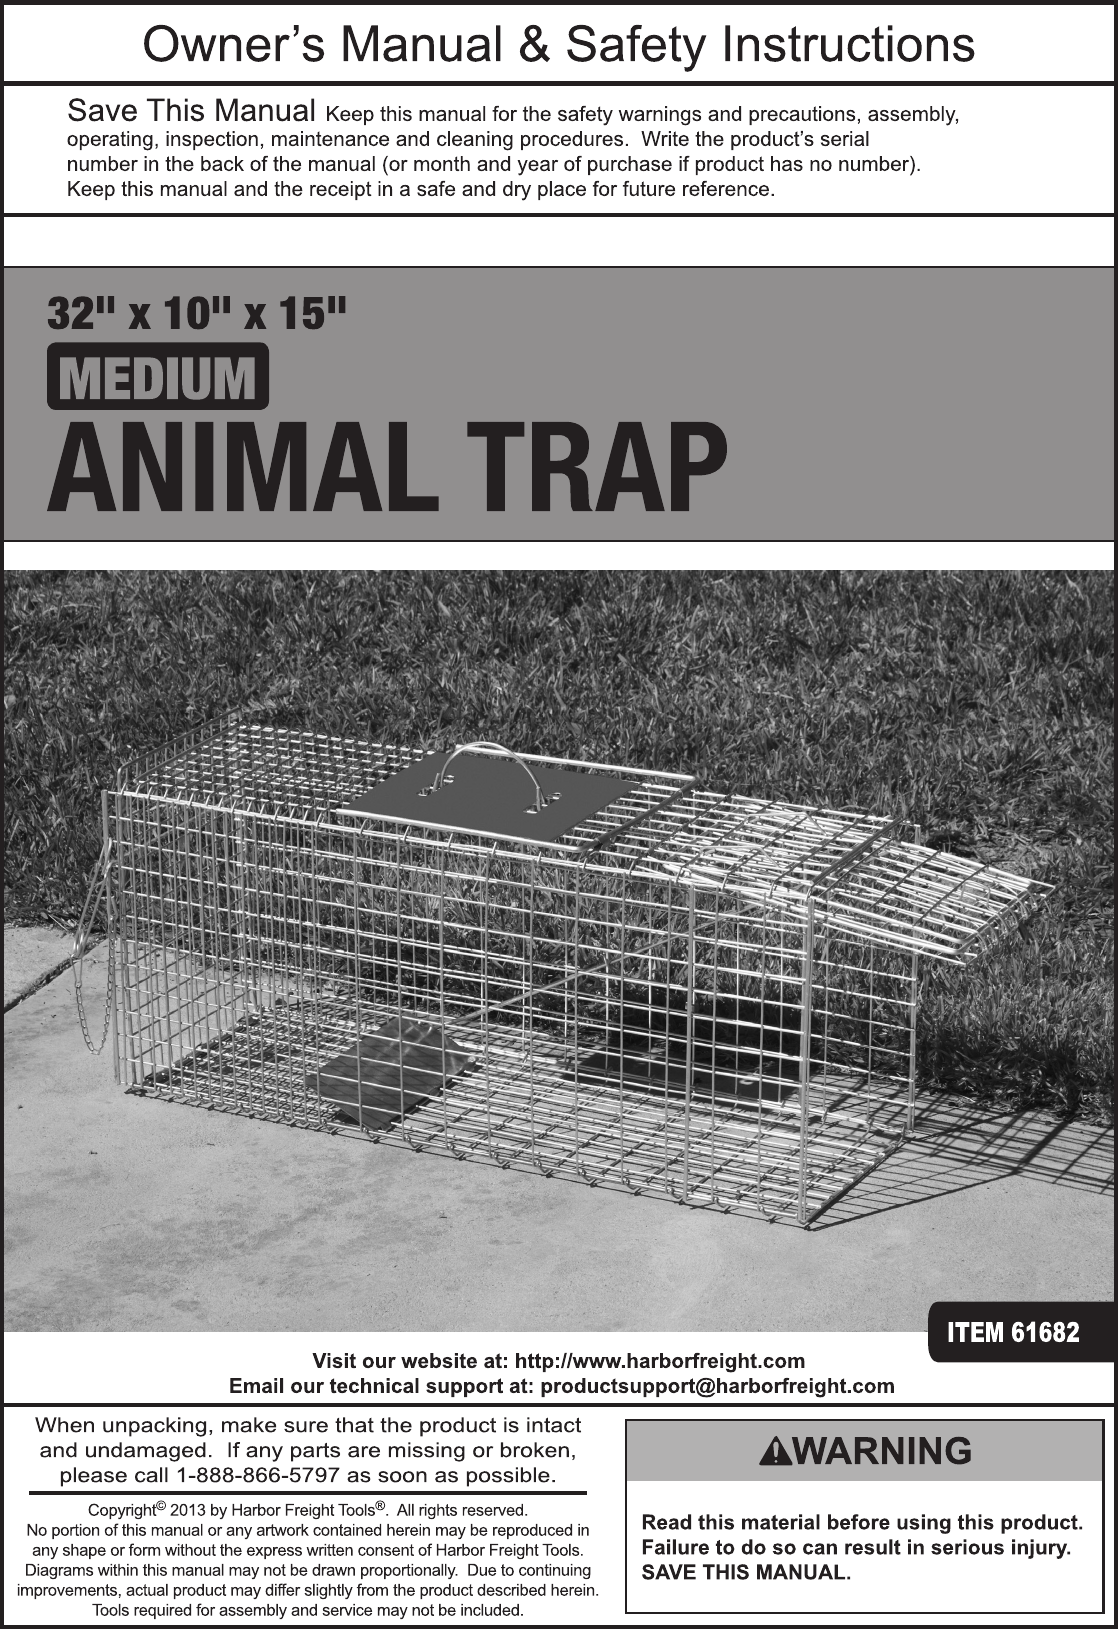 Page 1 of 8 - Harbor-Freight Harbor-Freight-32-In-X-15-In-X-10-In-Medium-Animal-Trap-Product-Manual-  Harbor-freight-32-in-x-15-in-x-10-in-medium-animal-trap-product-manual